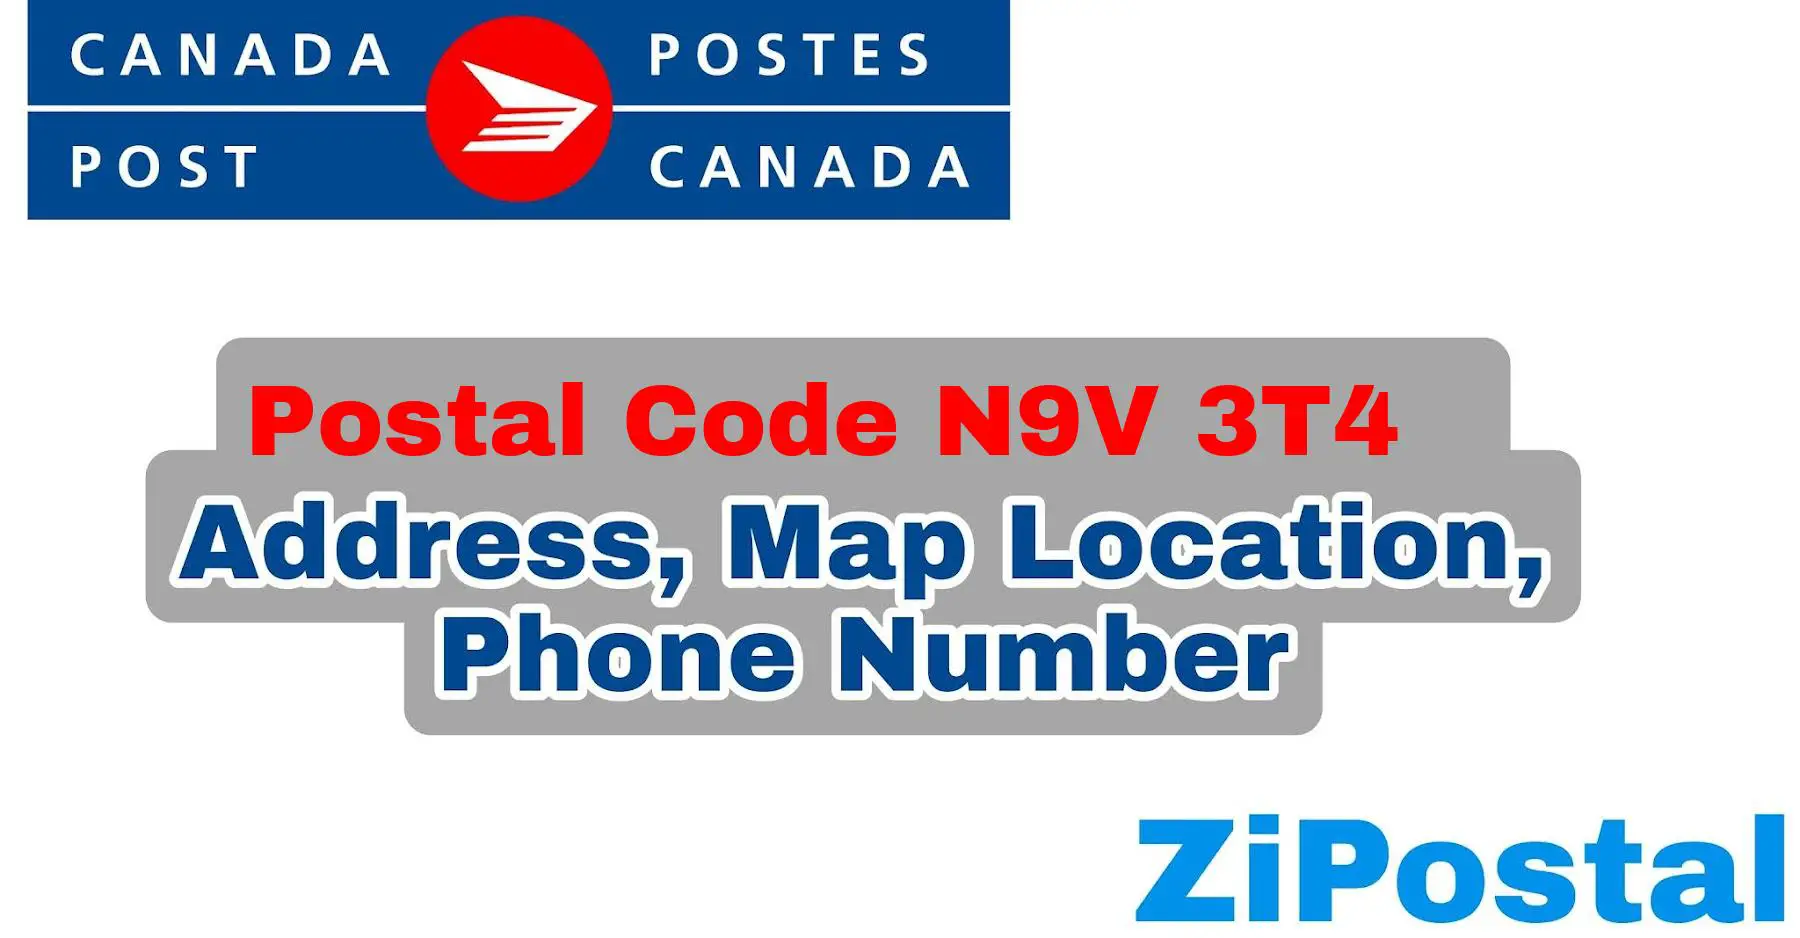 Postal Code N9V 3T4 Address Map Location and Phone Number